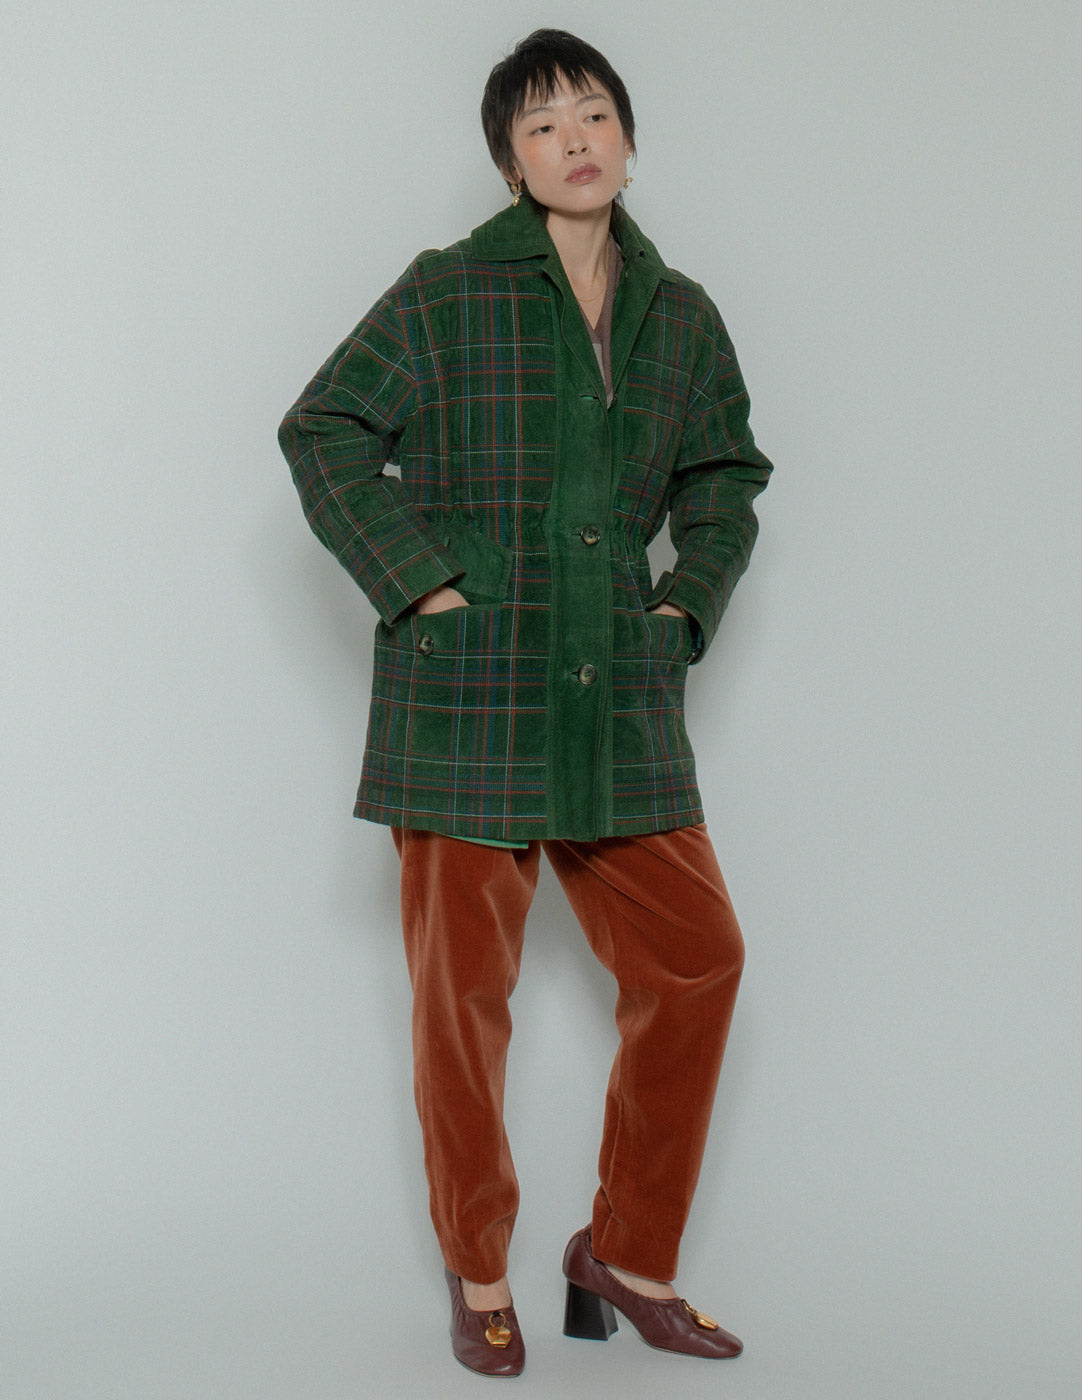 Loewe vintage forest green suede coat with plaid stitching